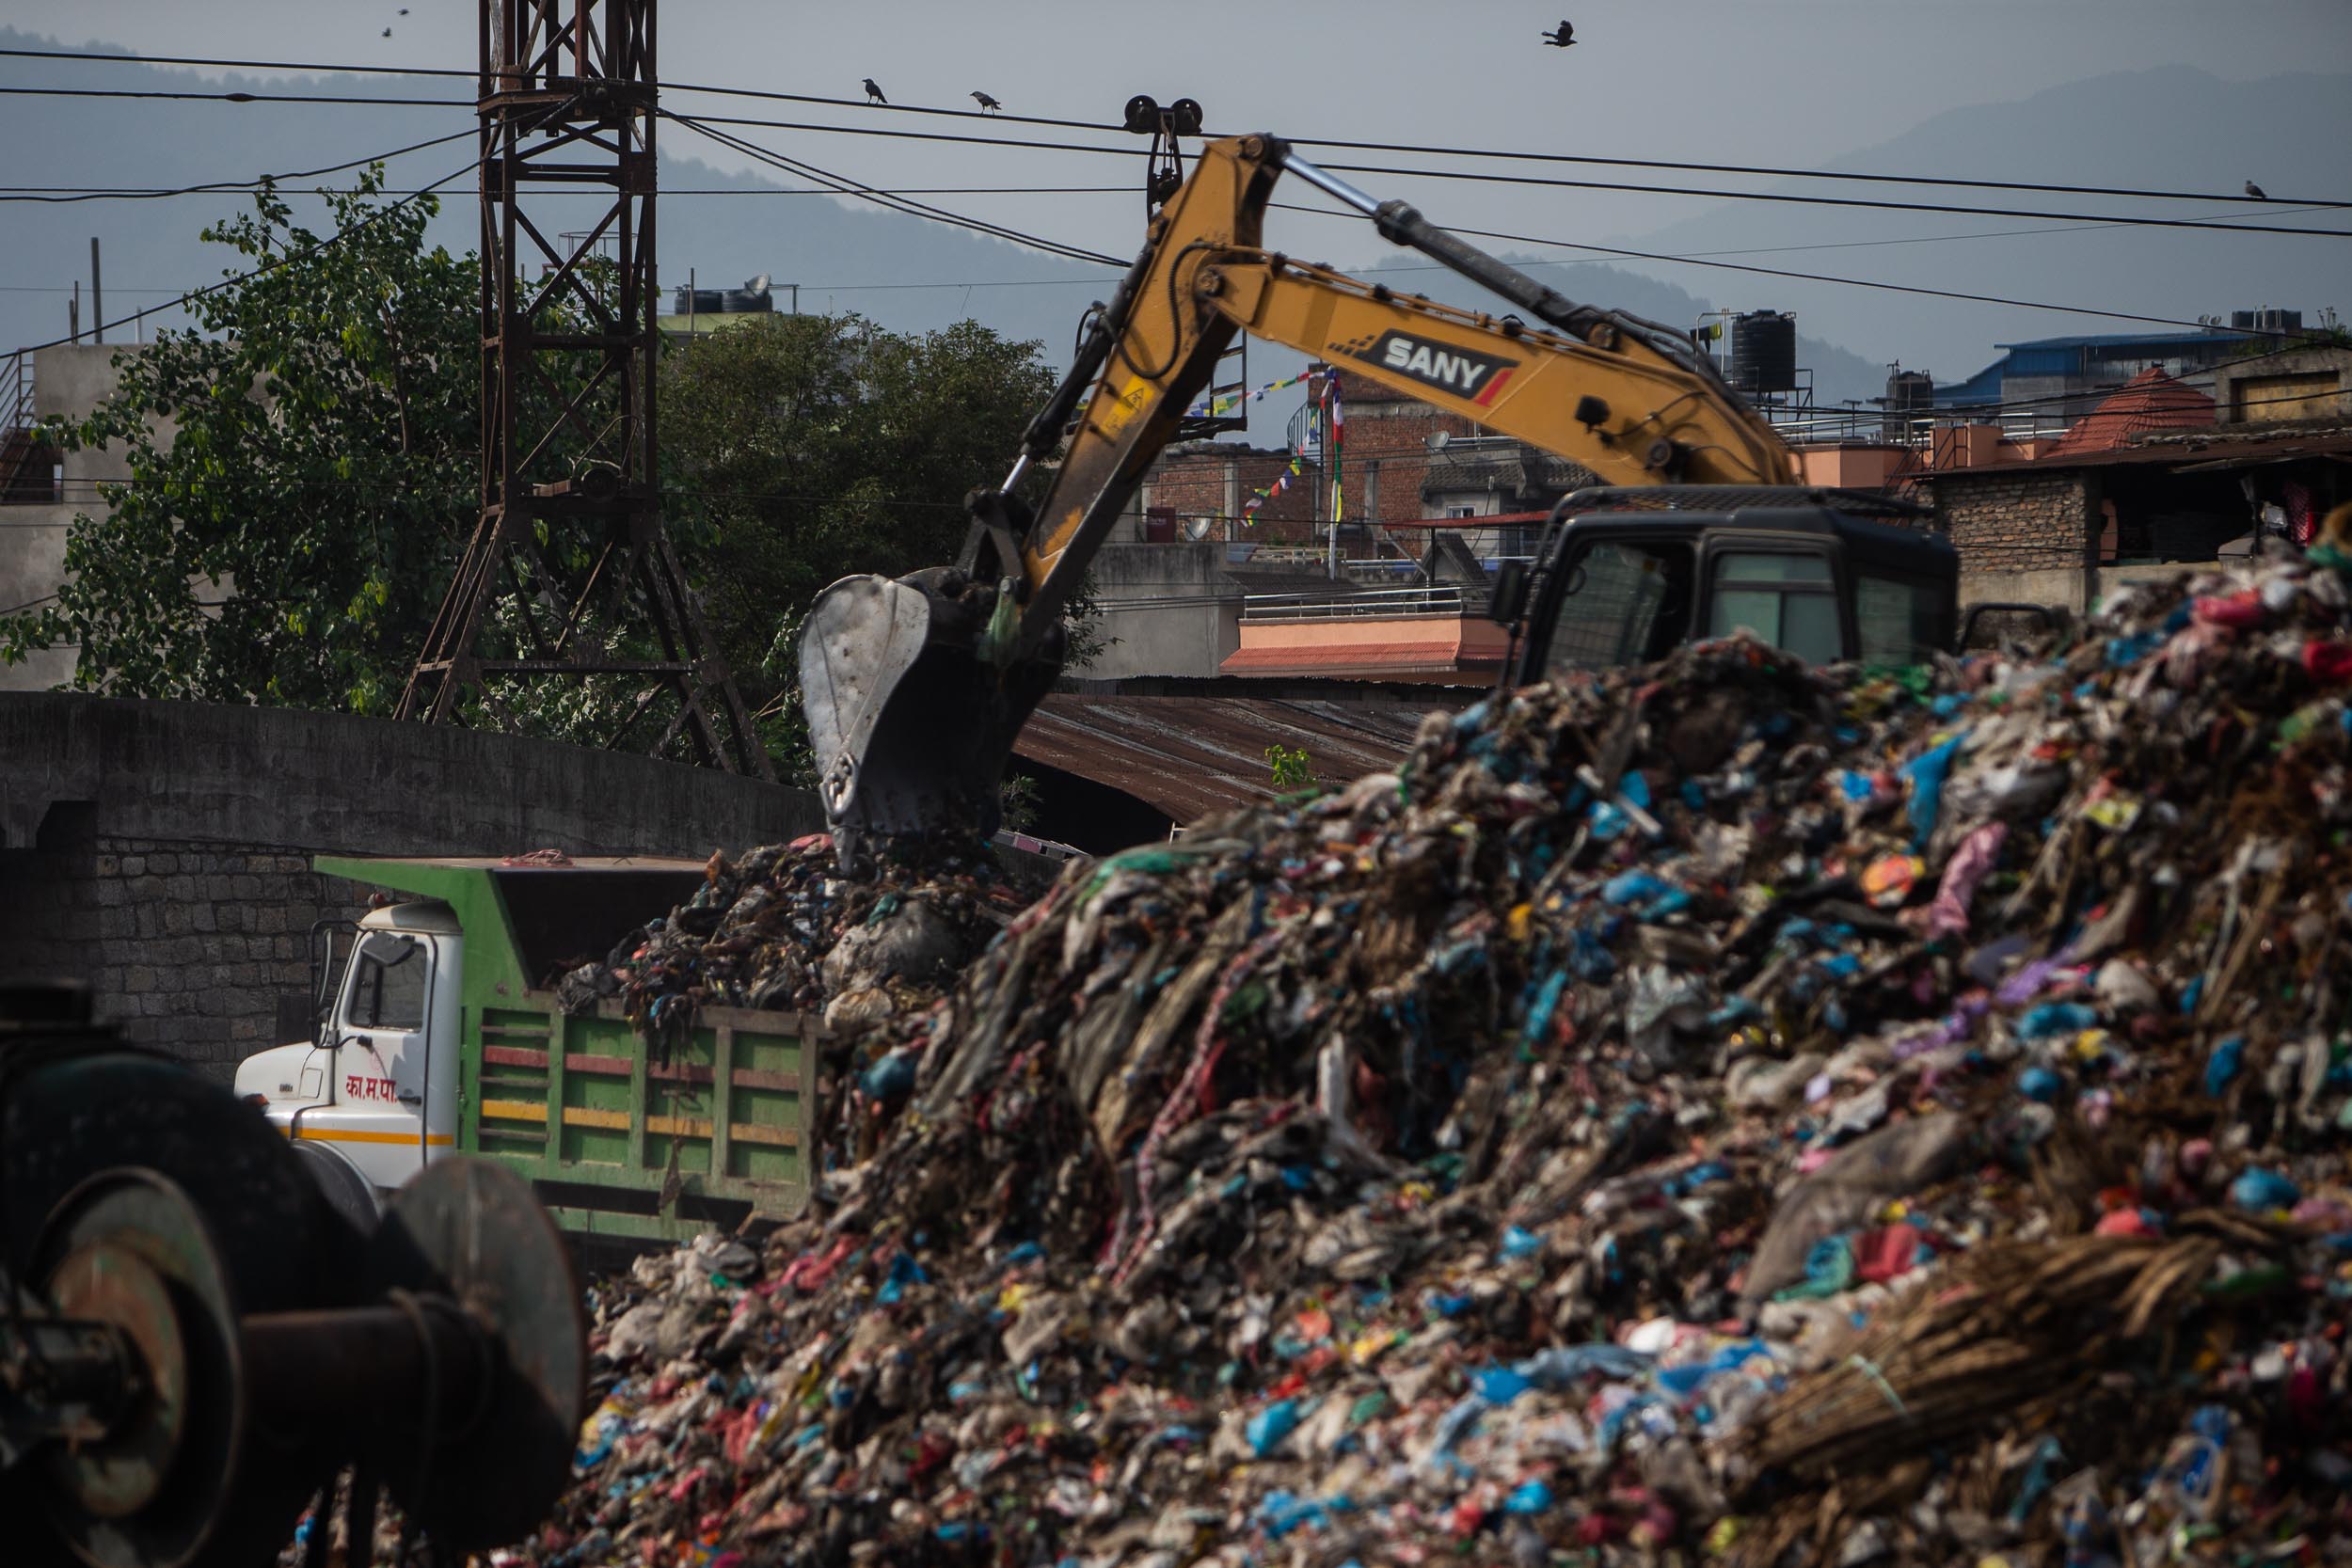 An excavator dumps waste into a truck which will transport the waste to Sisdole landfill area. (Image: Nishant Singh Gurung)